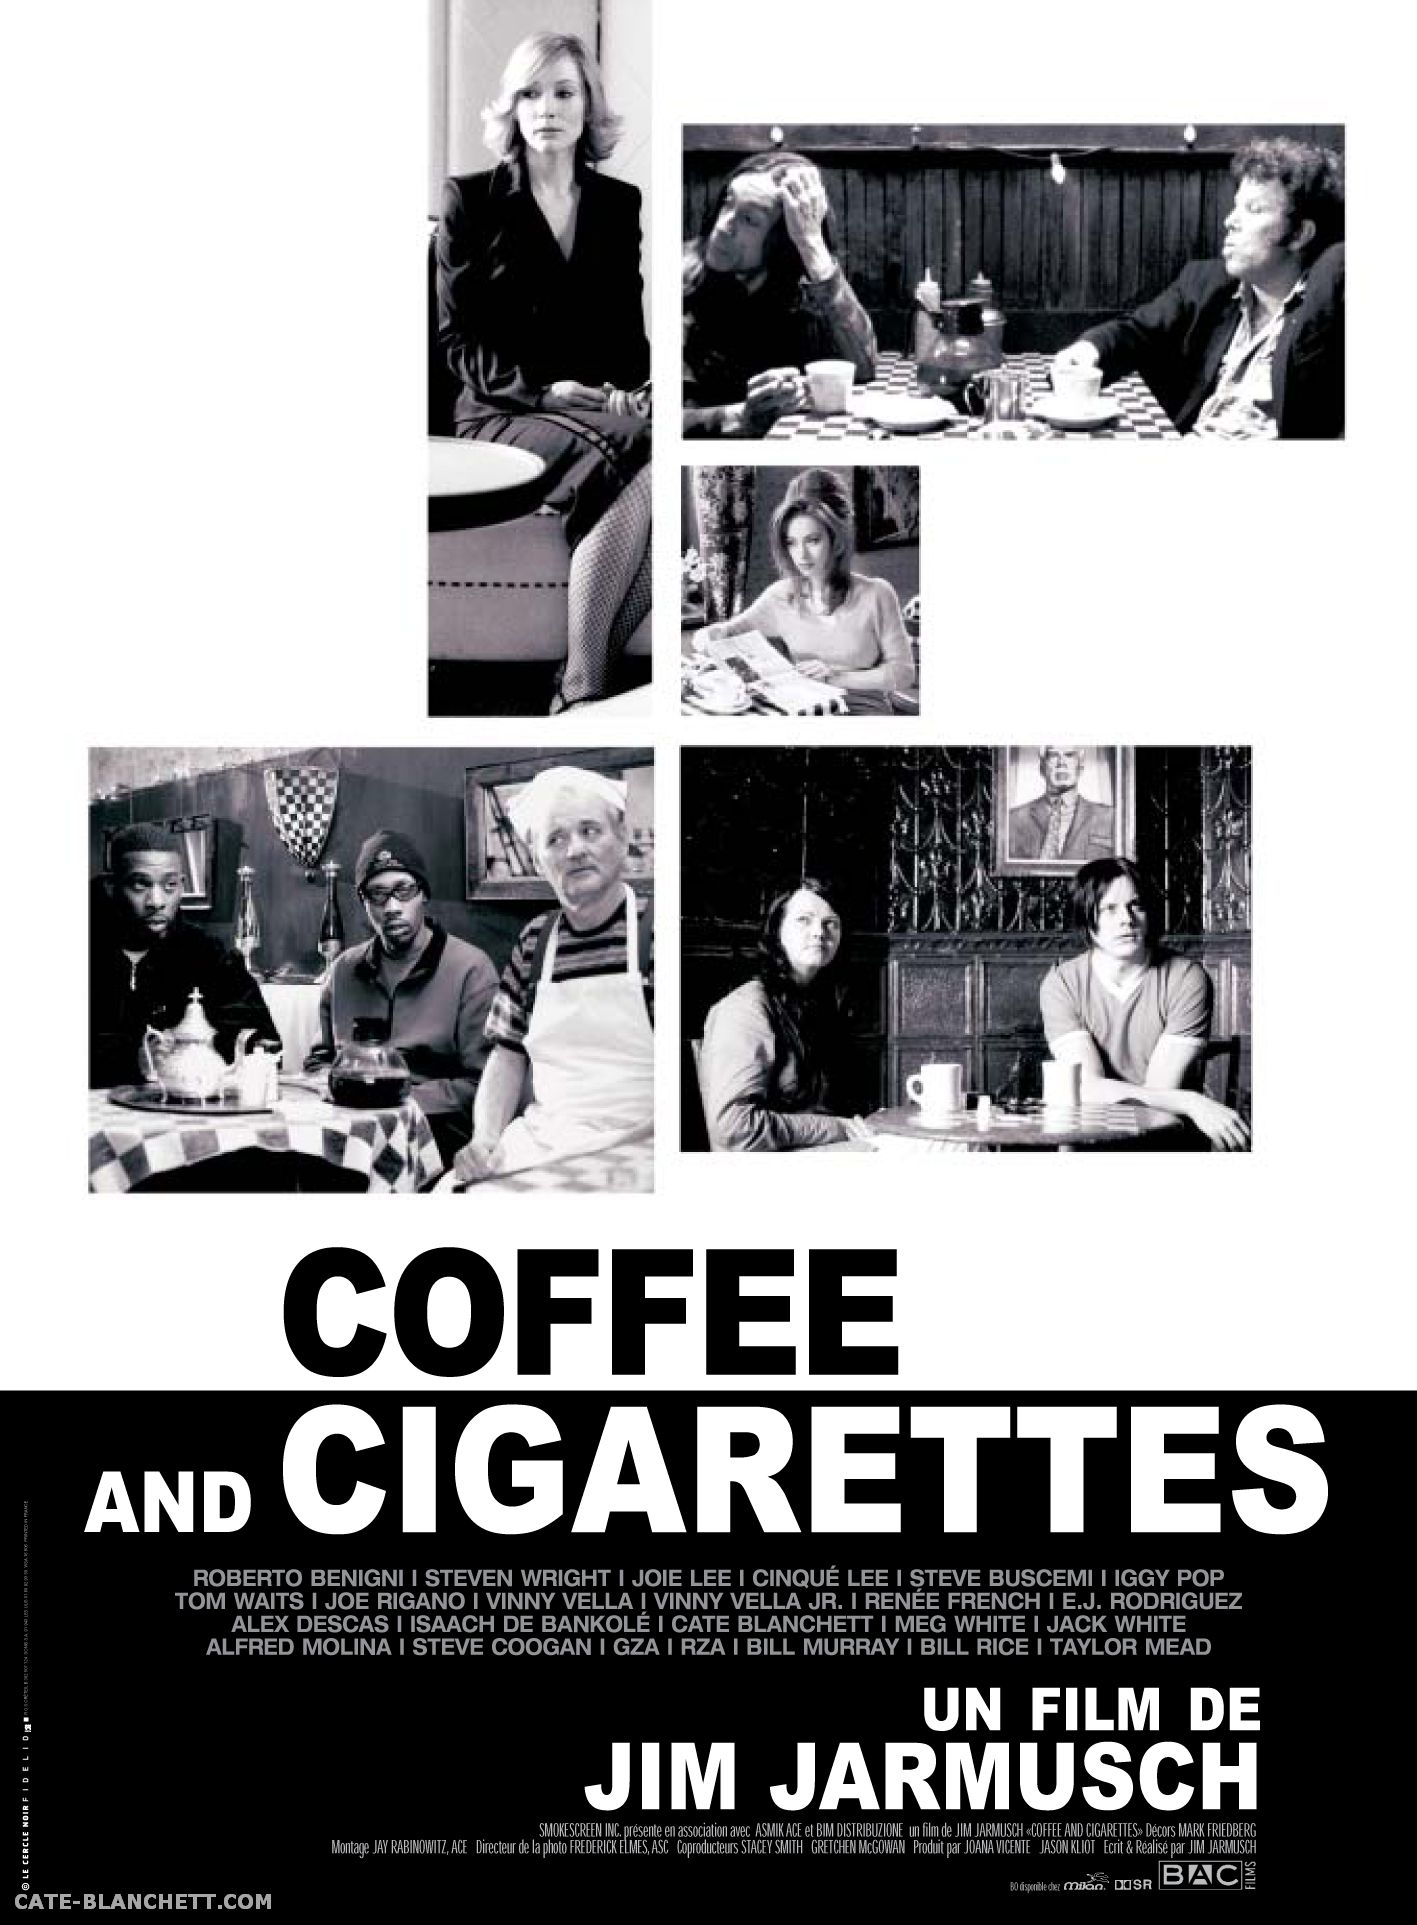 CoffeeandCigarettes-Posters-France_001.jpg